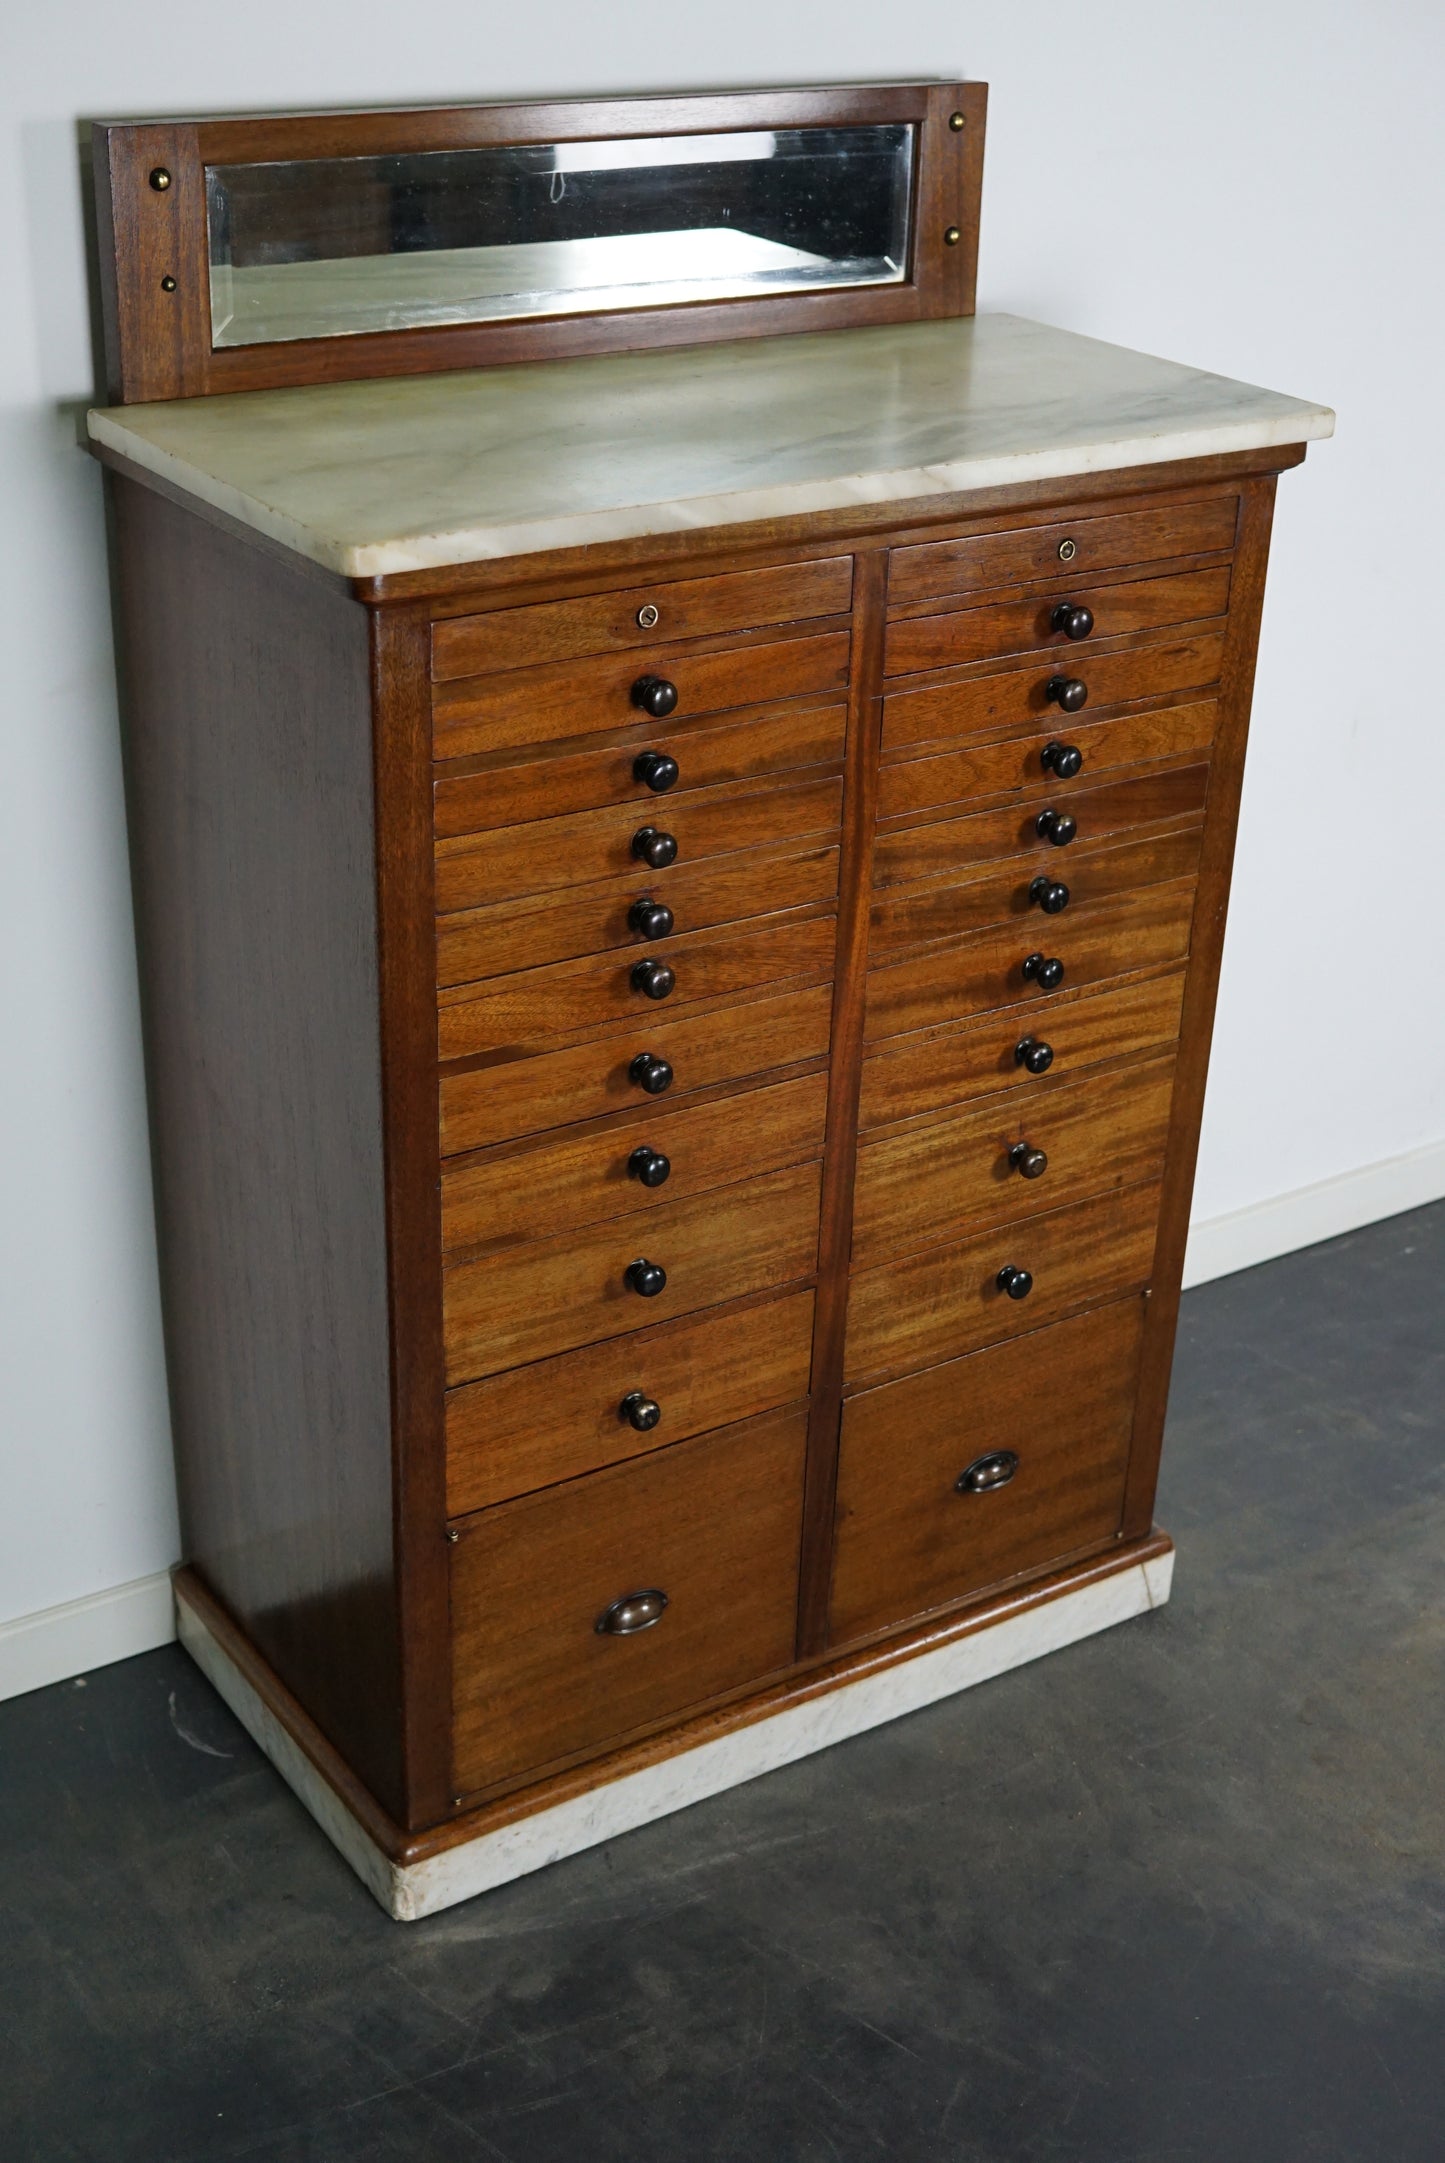 Antique Mahogany and Marble Dental / Dentist Cabinet, Amsterdam ca 1920